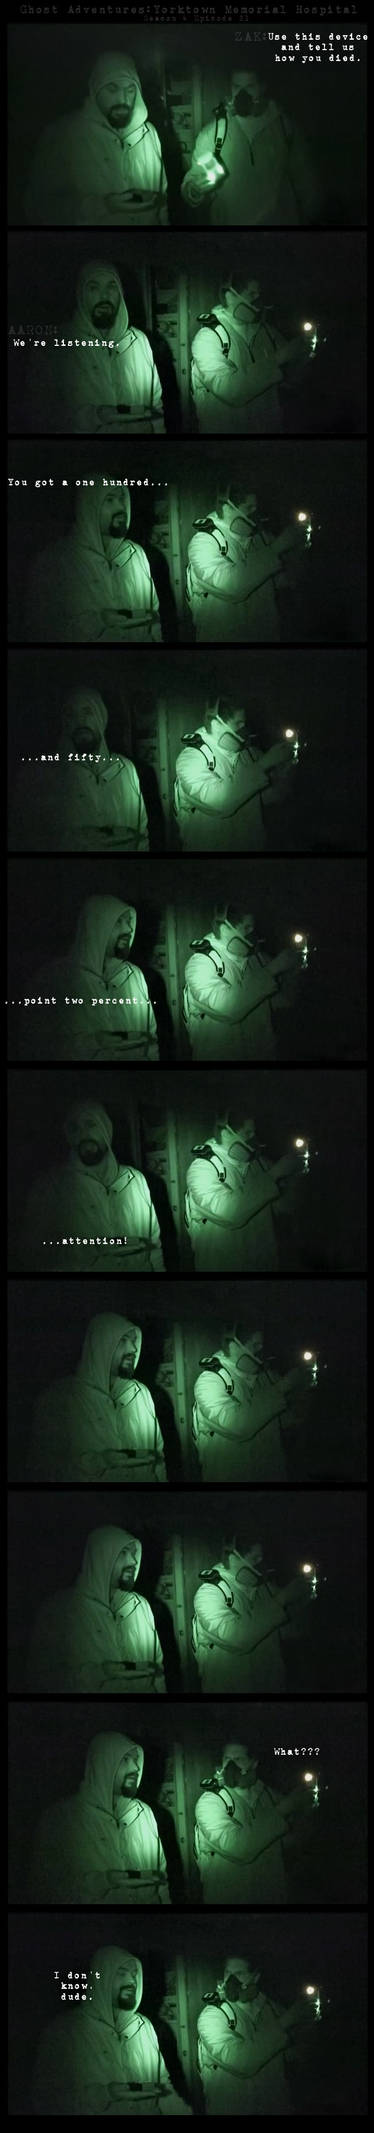 Ghost Adventures - Attention